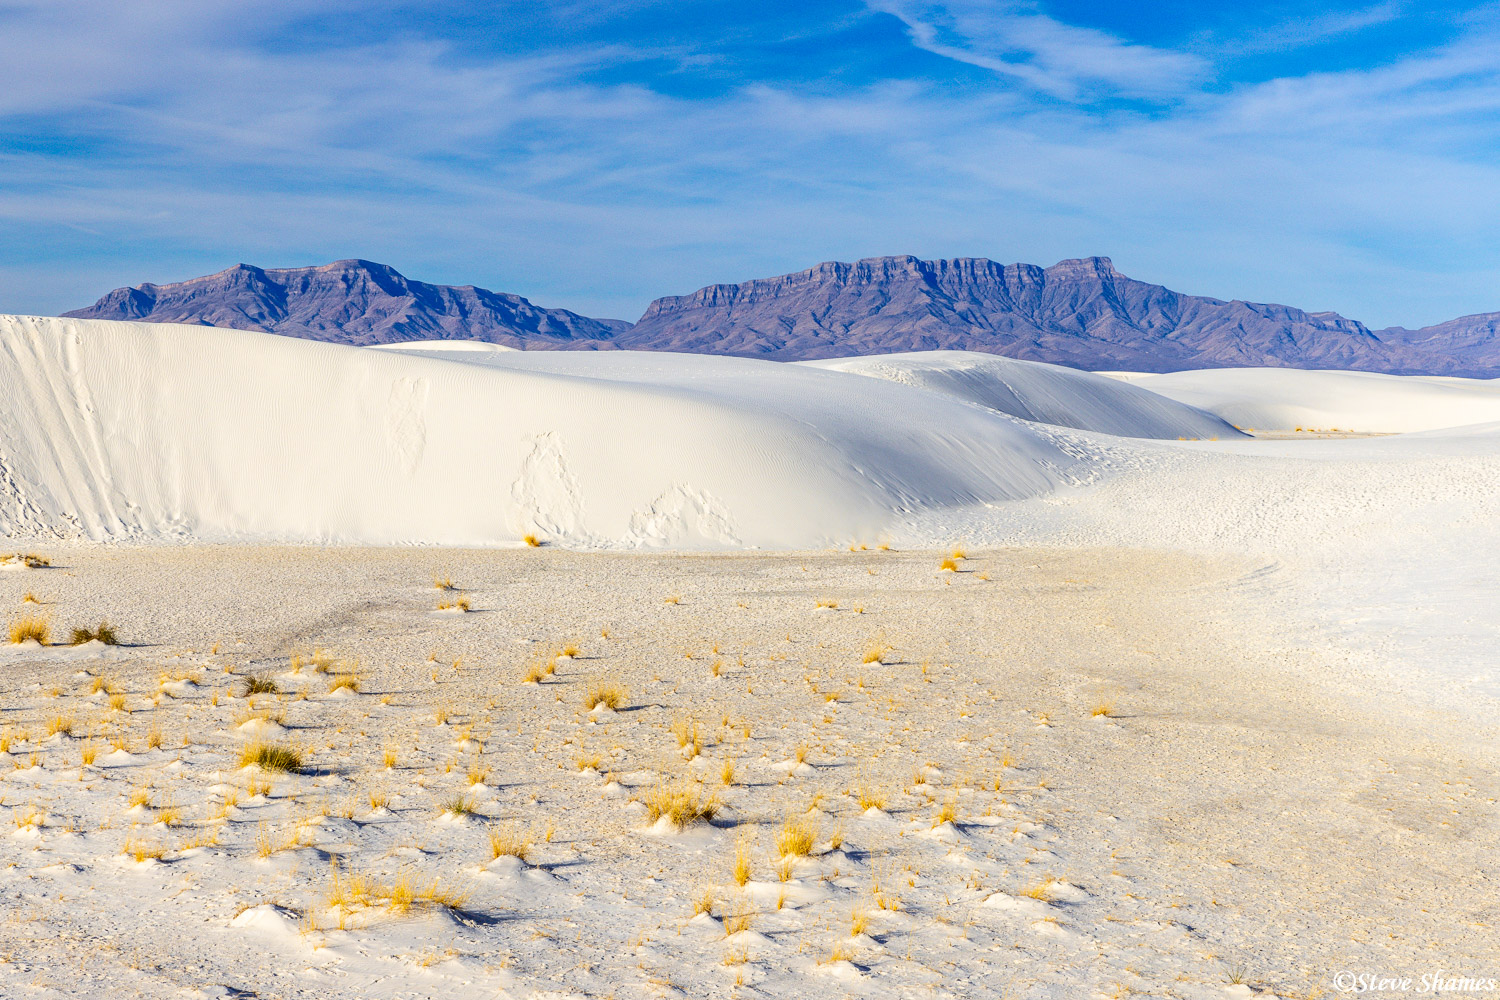 Here is the Alkali Flat Trail at White Sands. I like that nice view of the mountains in the back.